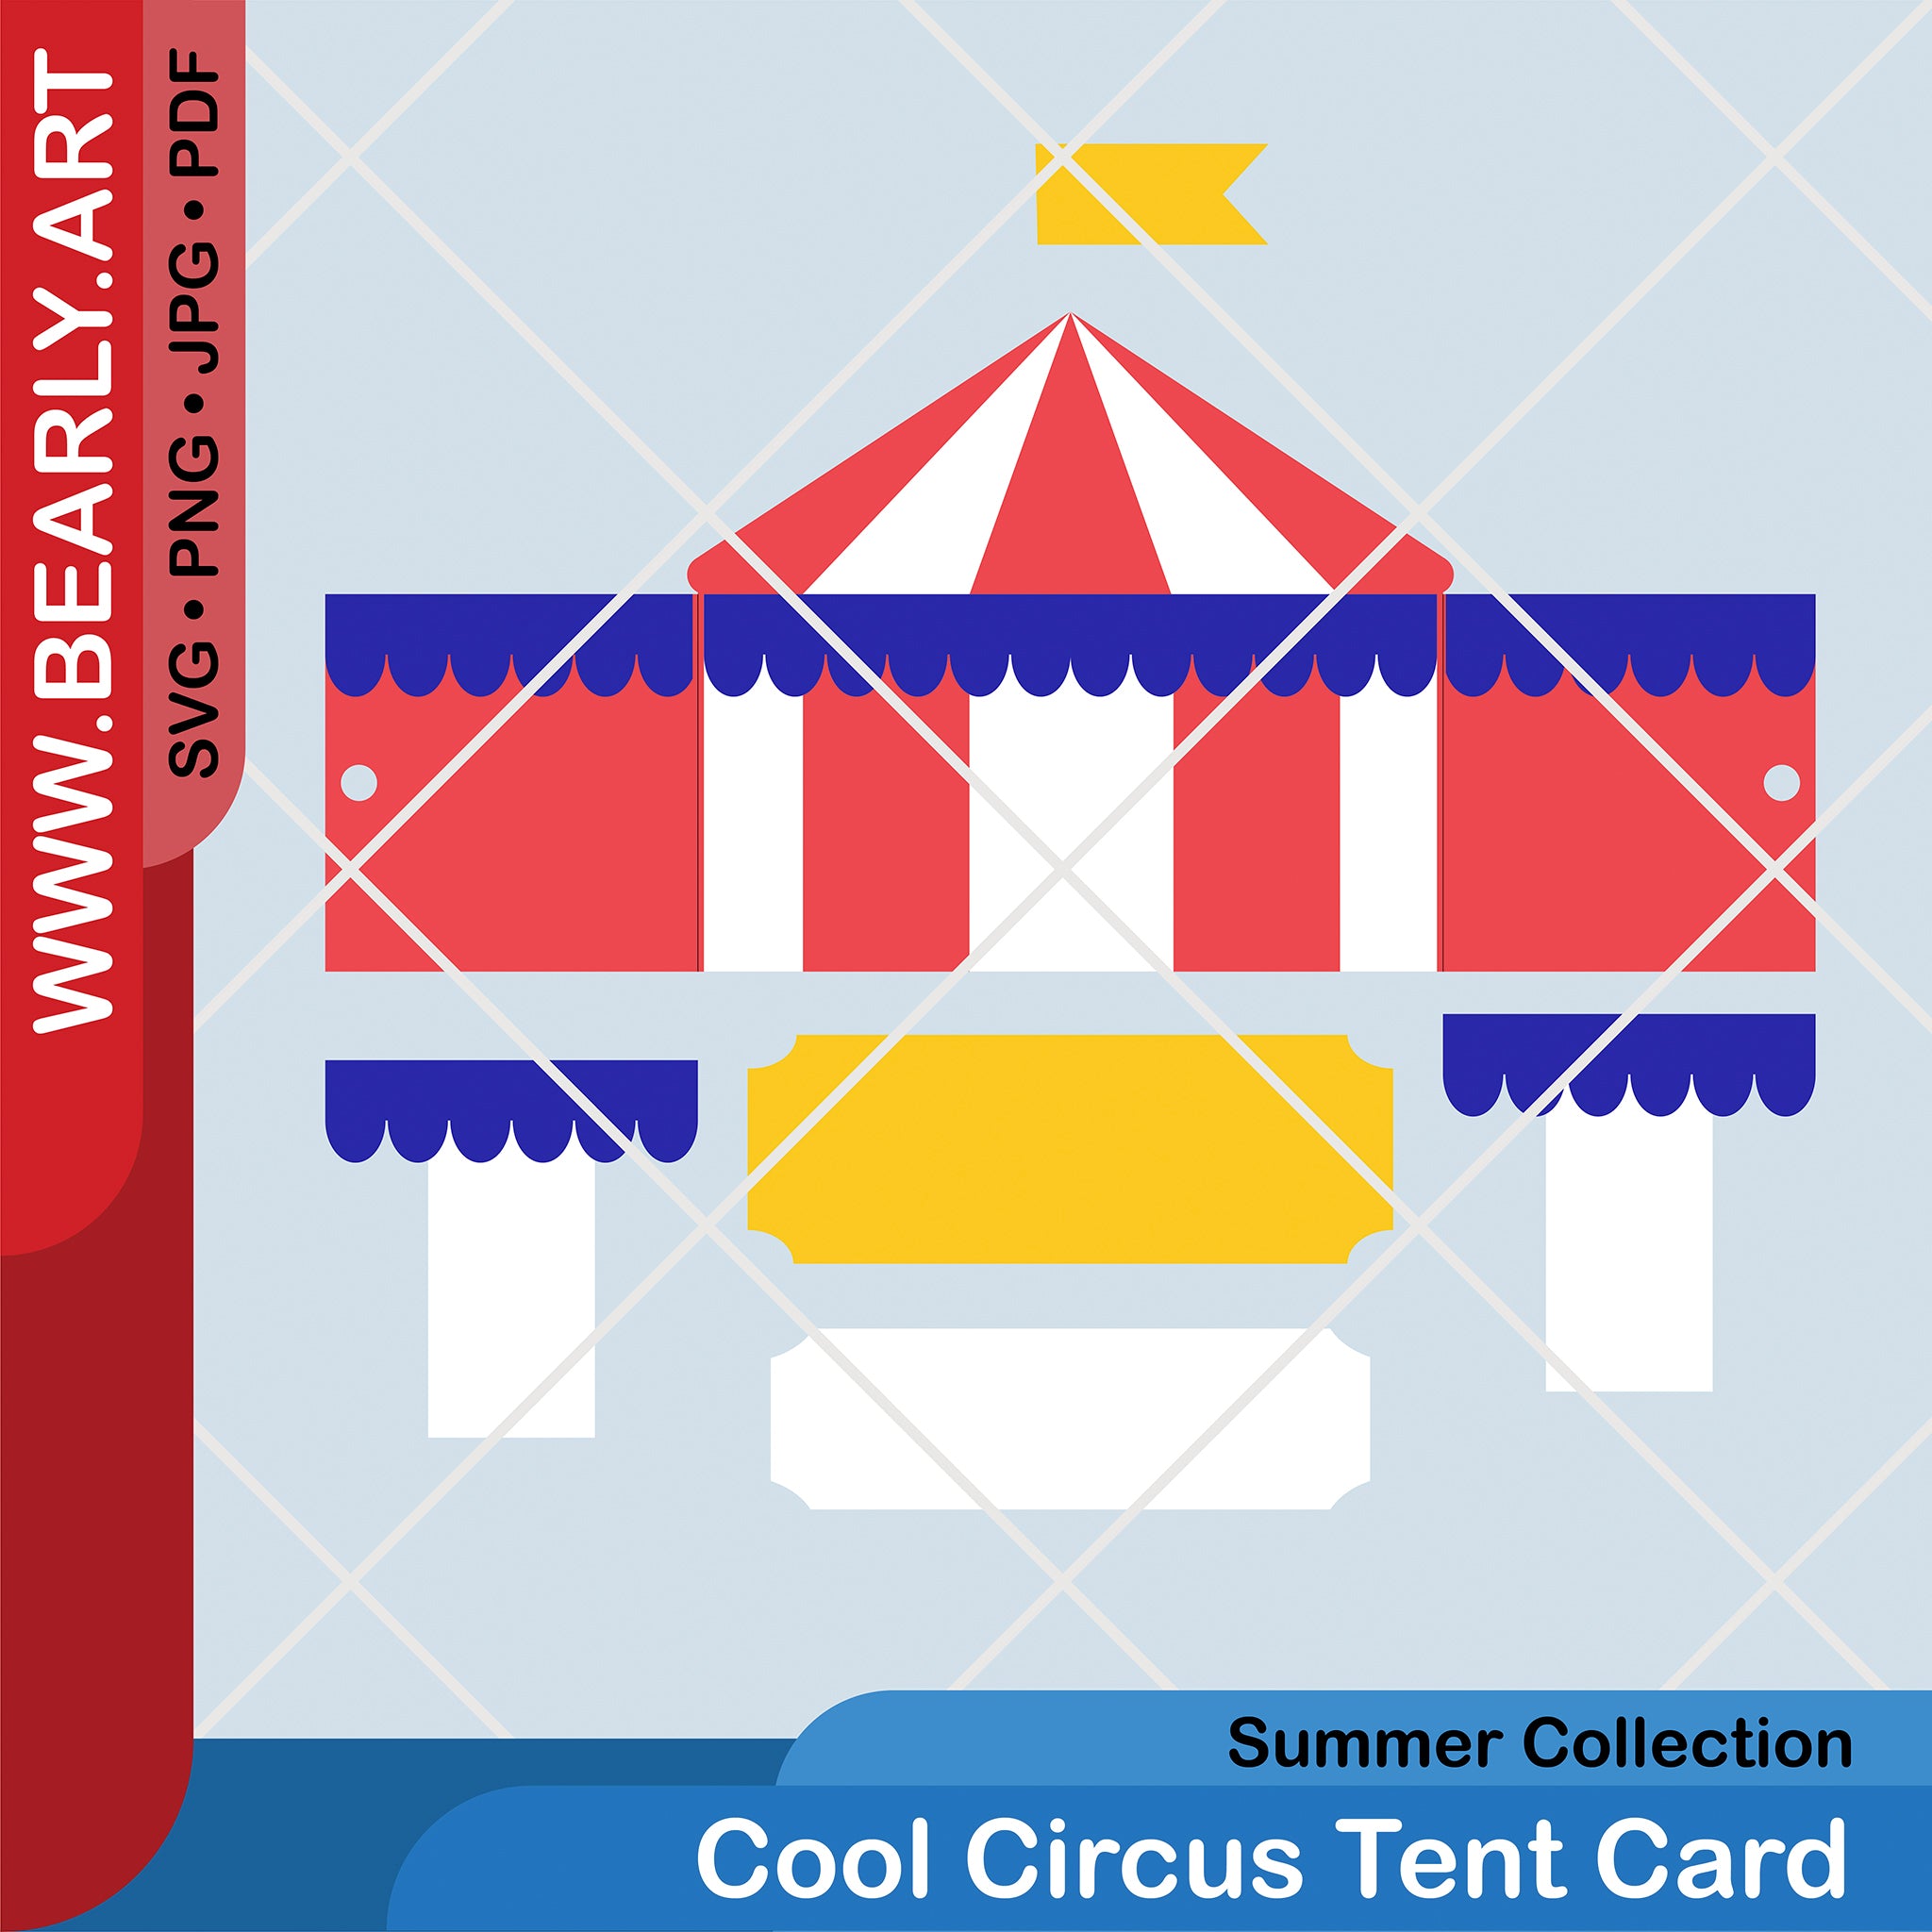 carnival ticket booth template